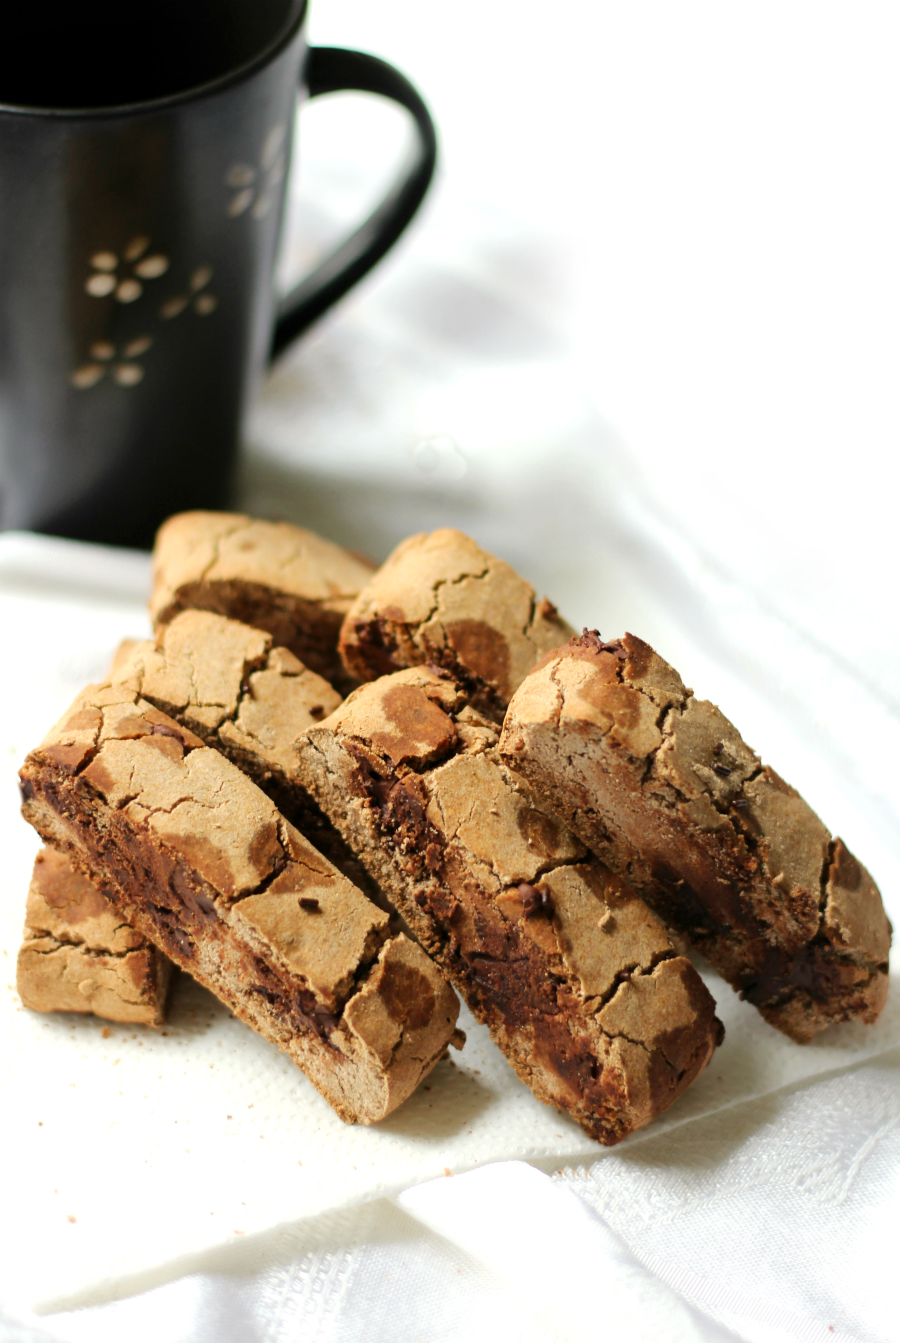 Chocolate Chip Teff Biscotti | Strength and Sunshine @RebeccaGF666 Grab your cup of coffee and a Chocolate Chip Teff Biscotti for a few moments of at-home bakery bliss! A gluten-free, nut-free, allergy-free, and vegan healthy recipe so you can enjoy this Italian classic once again without sacrificing flavor or crunch!